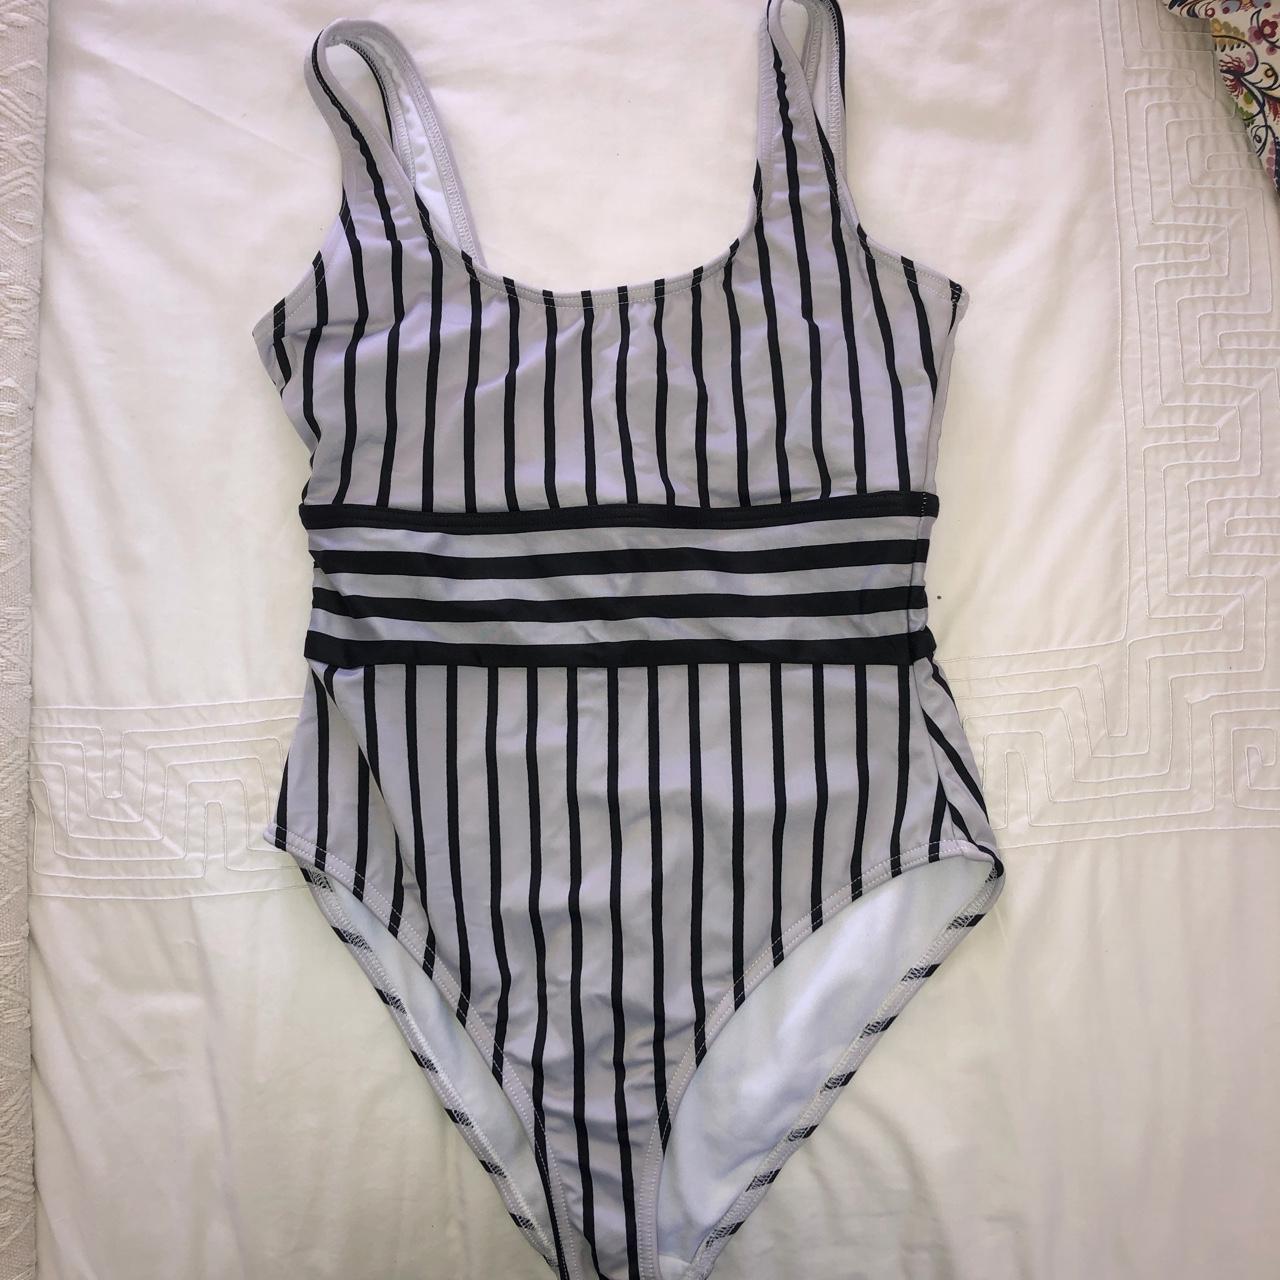 ASOS Women's Black and White Swimsuit-one-piece | Depop